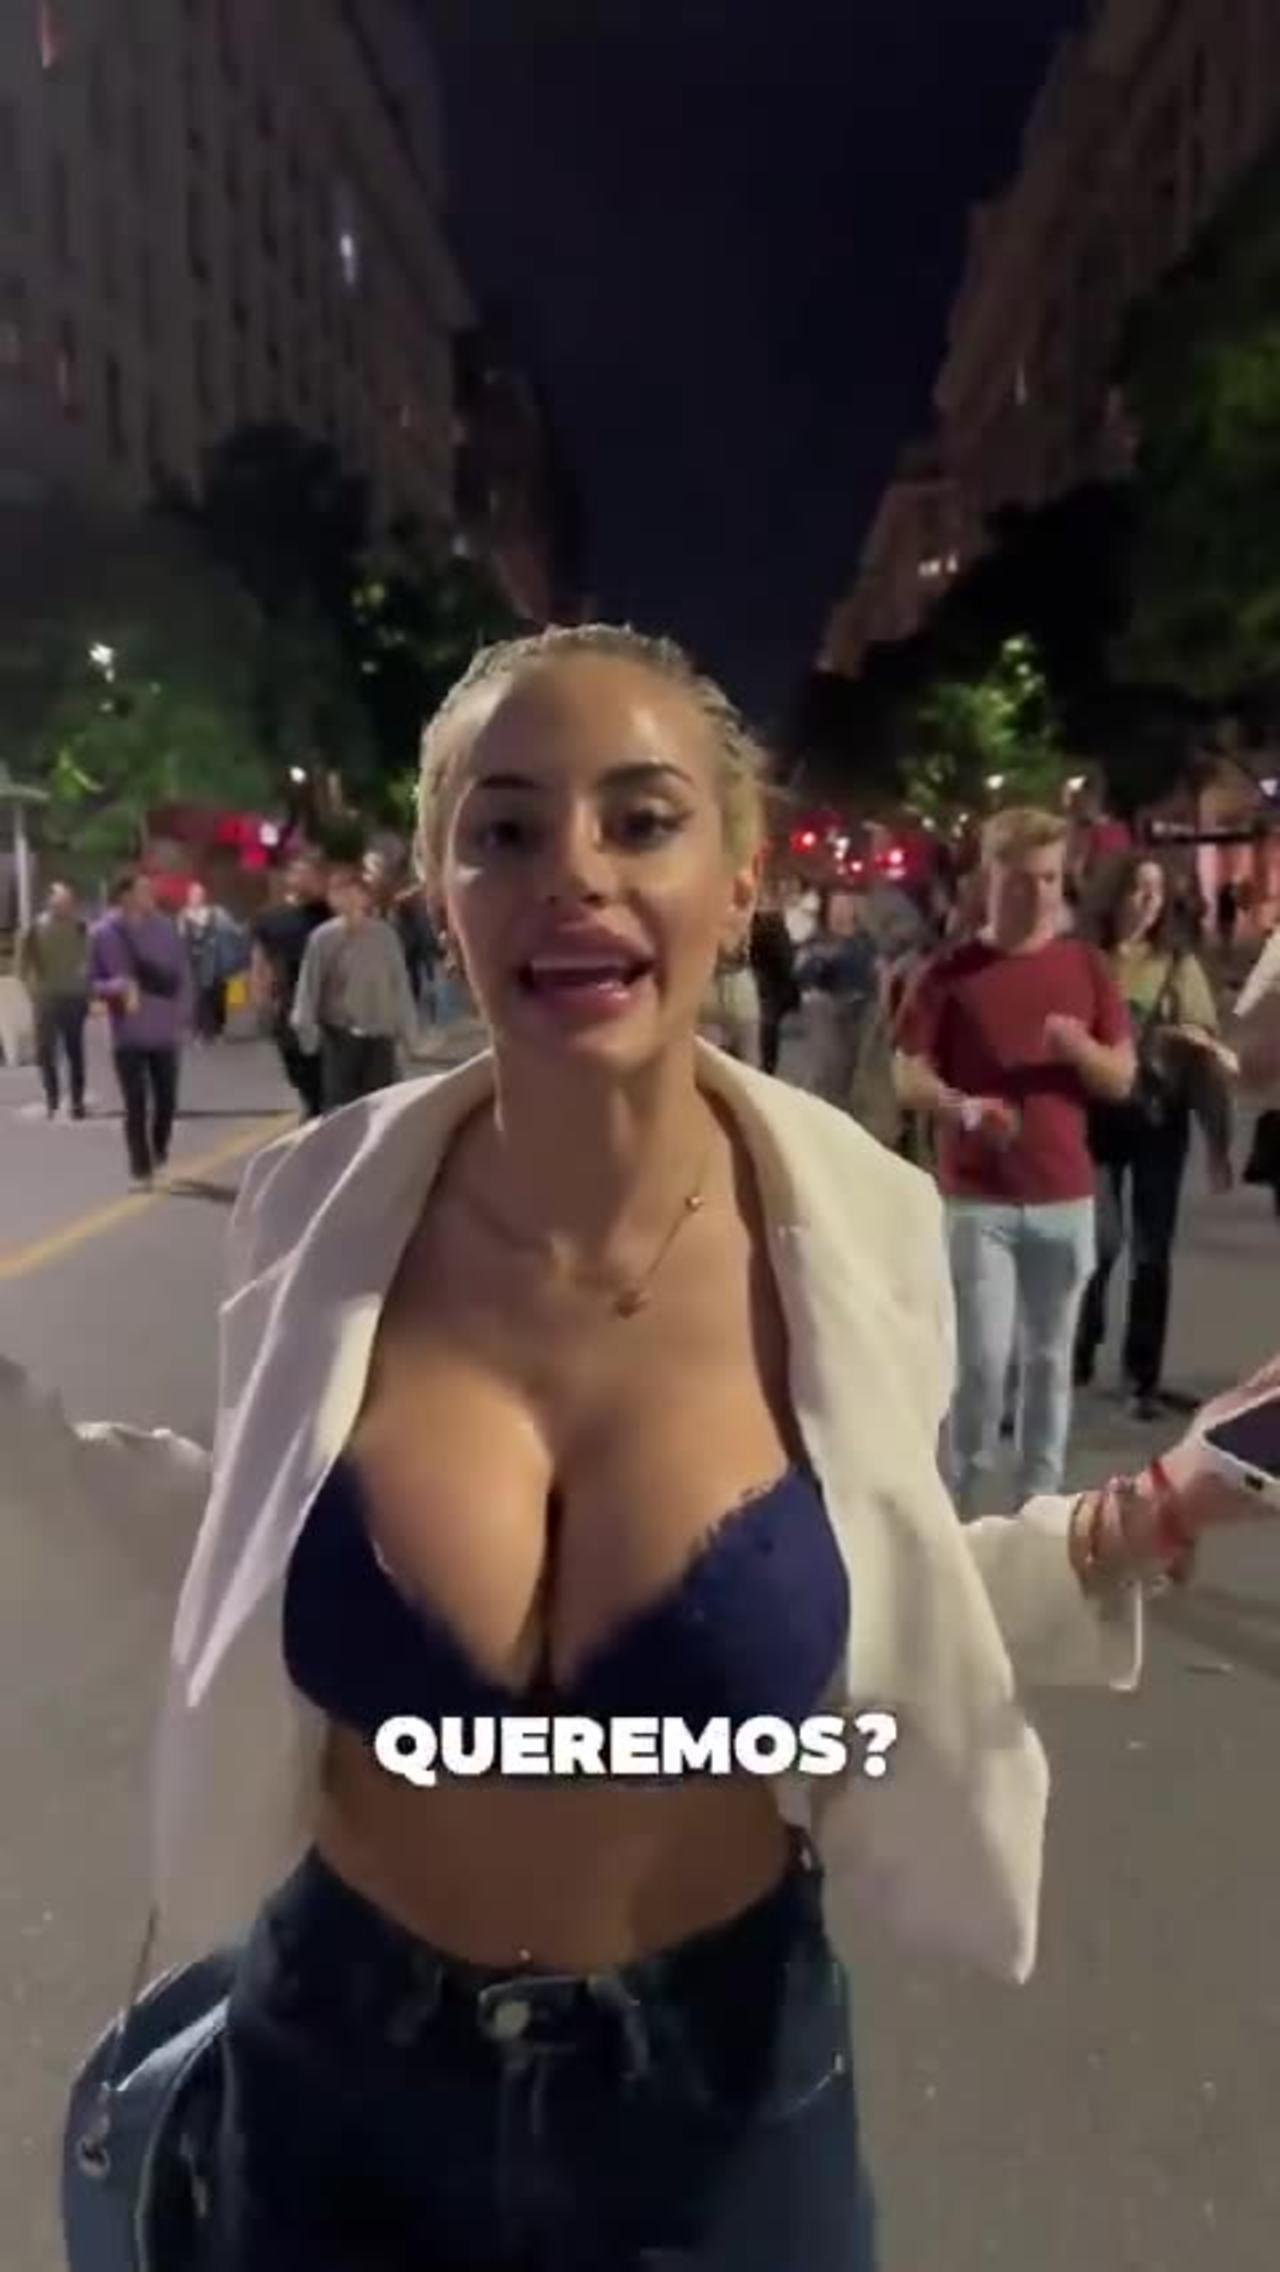 Big Breasted Protestor in Argentina